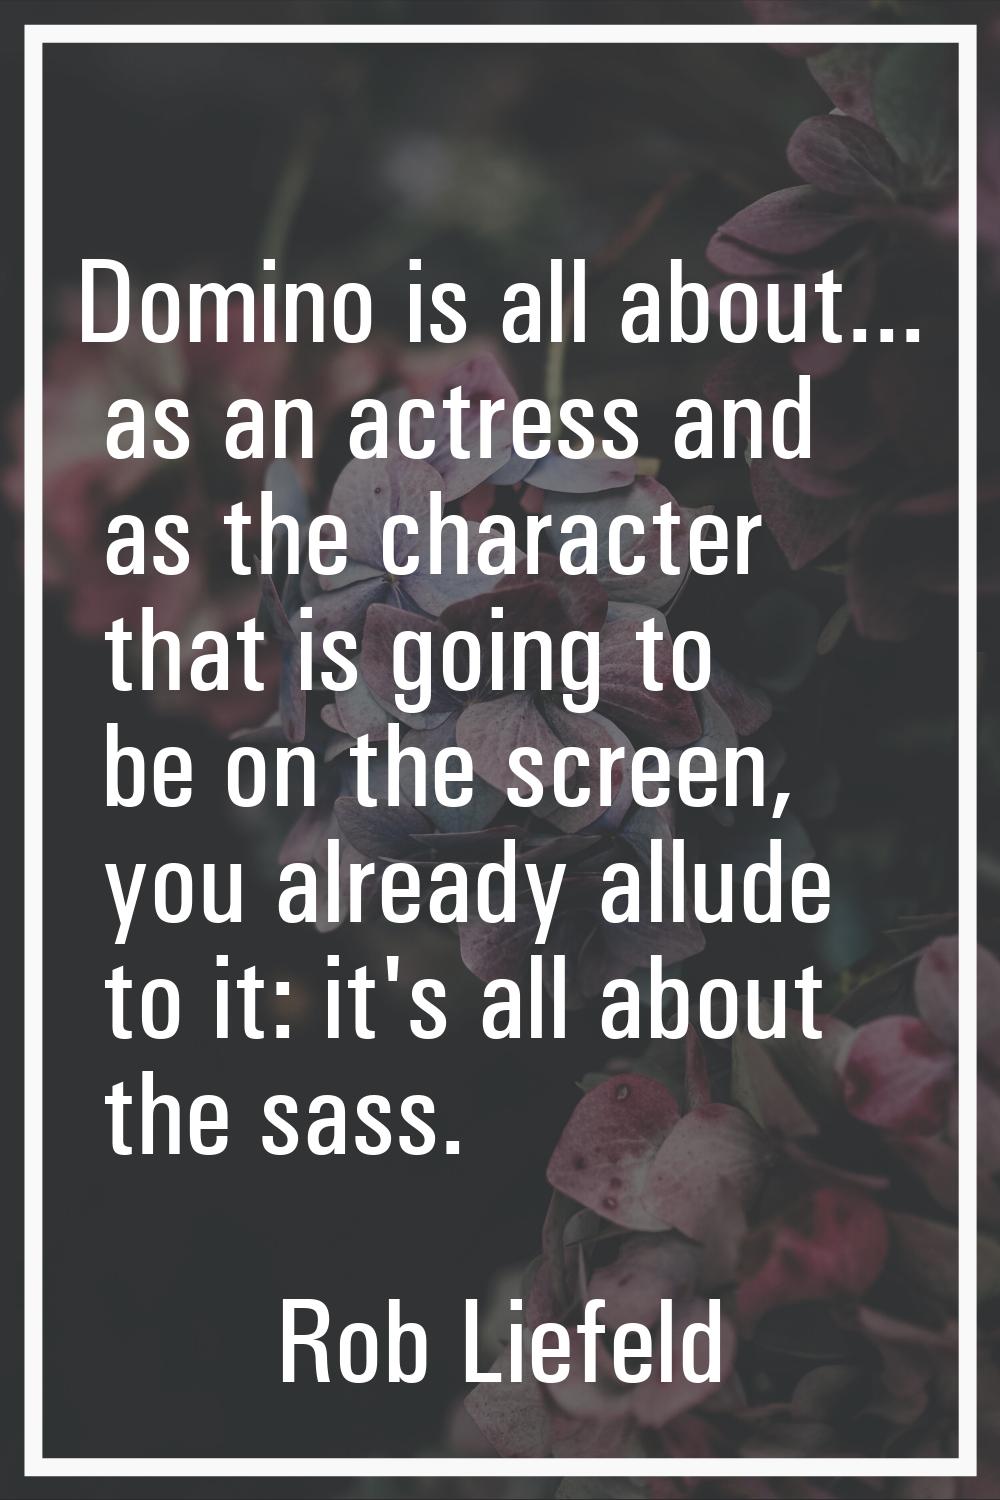 Domino is all about... as an actress and as the character that is going to be on the screen, you al